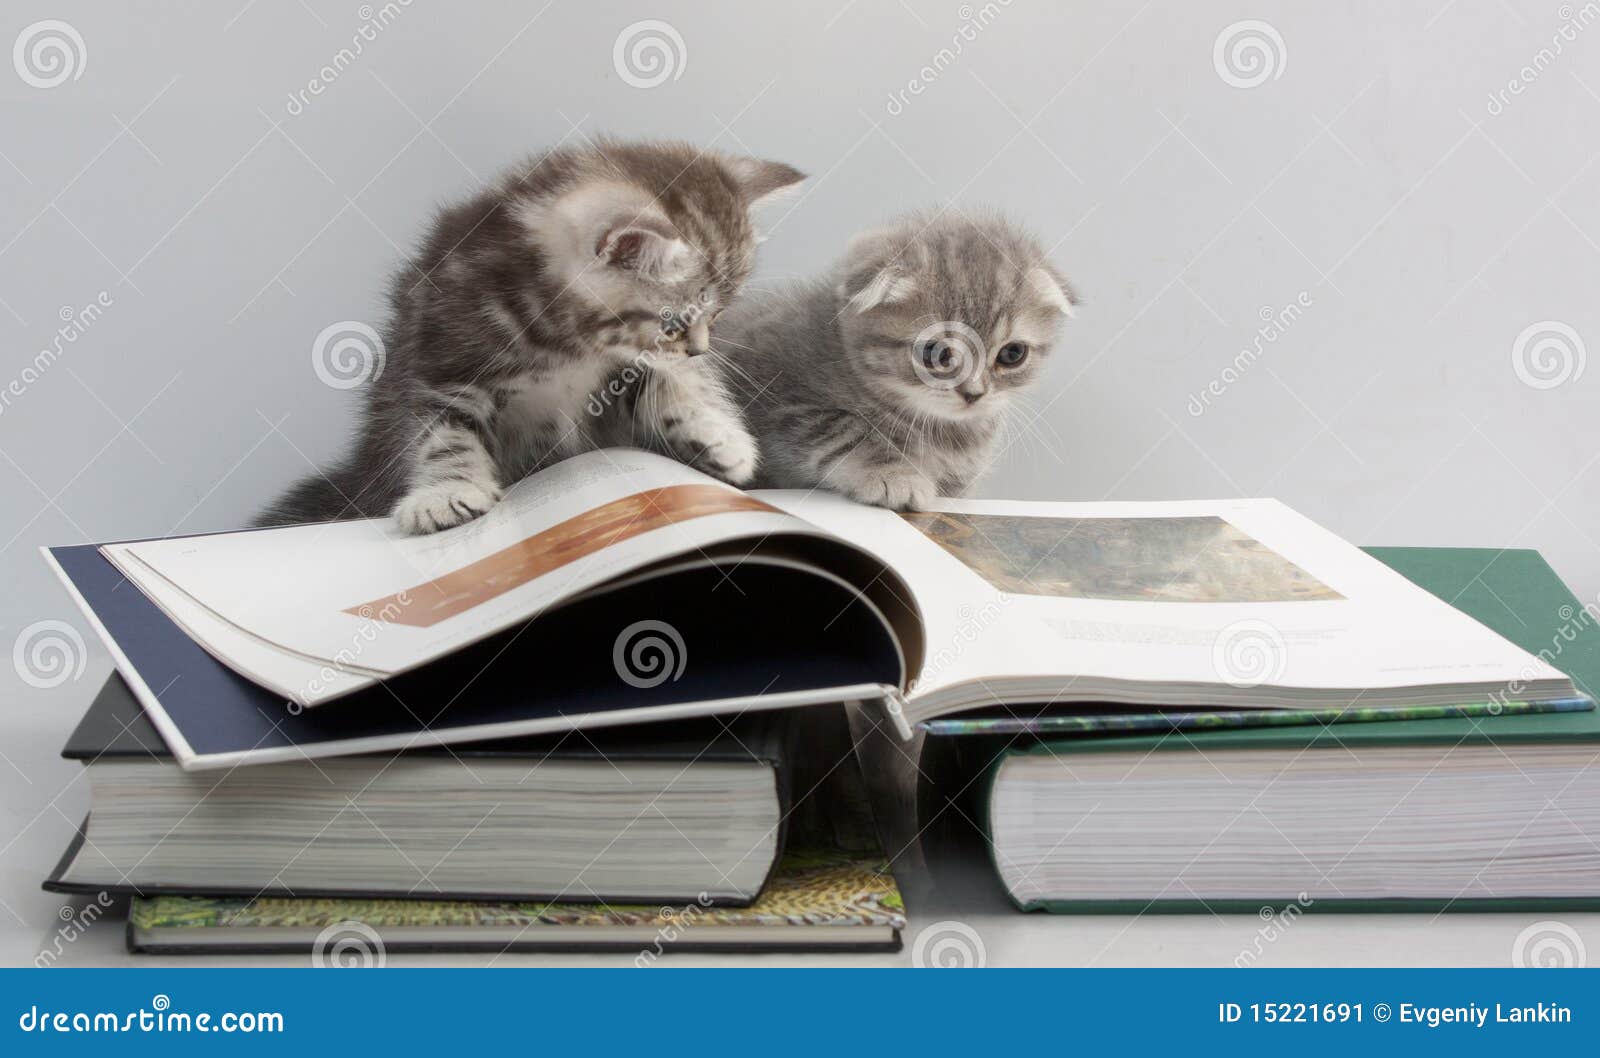 two kittens are considering a book